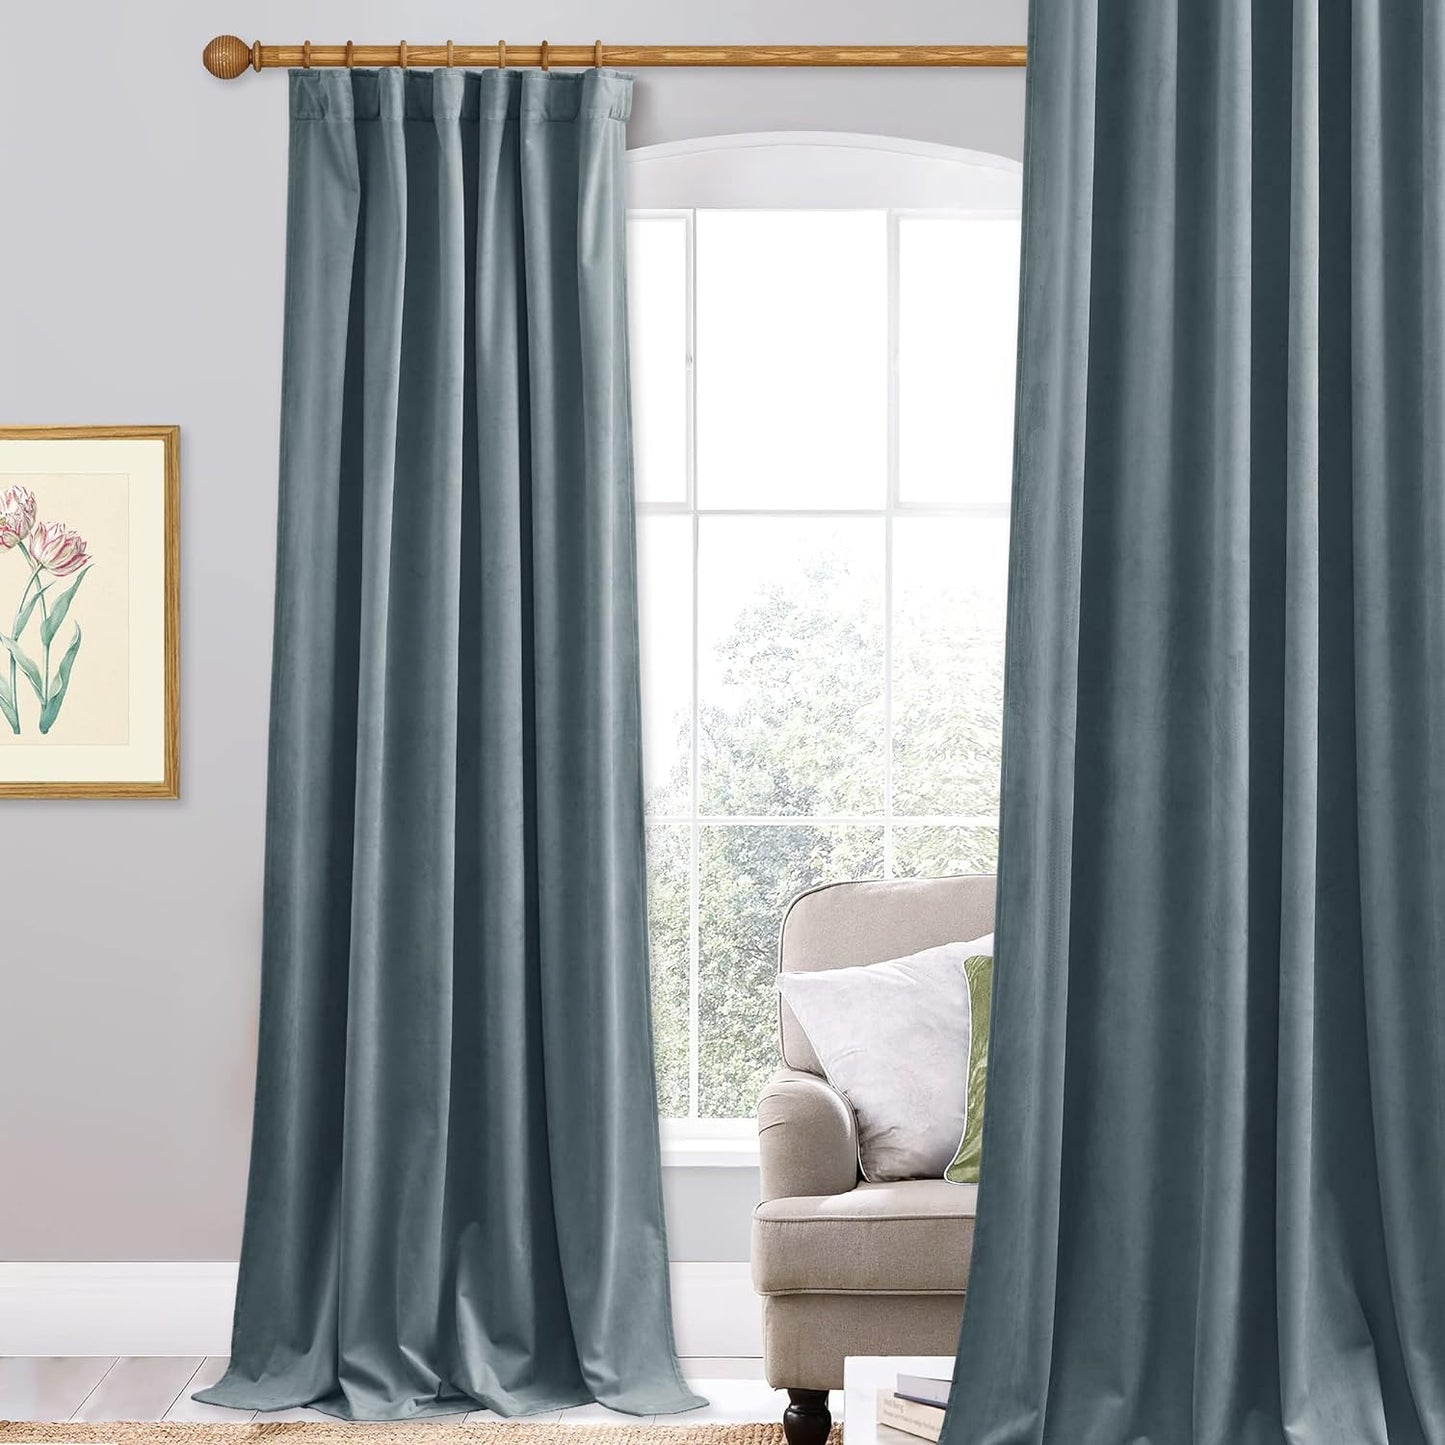 Stangh Navy Blue Velvet Curtains 96 Inches Long for Living Room, Luxury Blackout Sliding Door Curtains Thermal Insulated Window Drapes for Bedroom, W52 X L96 Inches, 1 Panel  StangH Stone Blue W52 X L84 